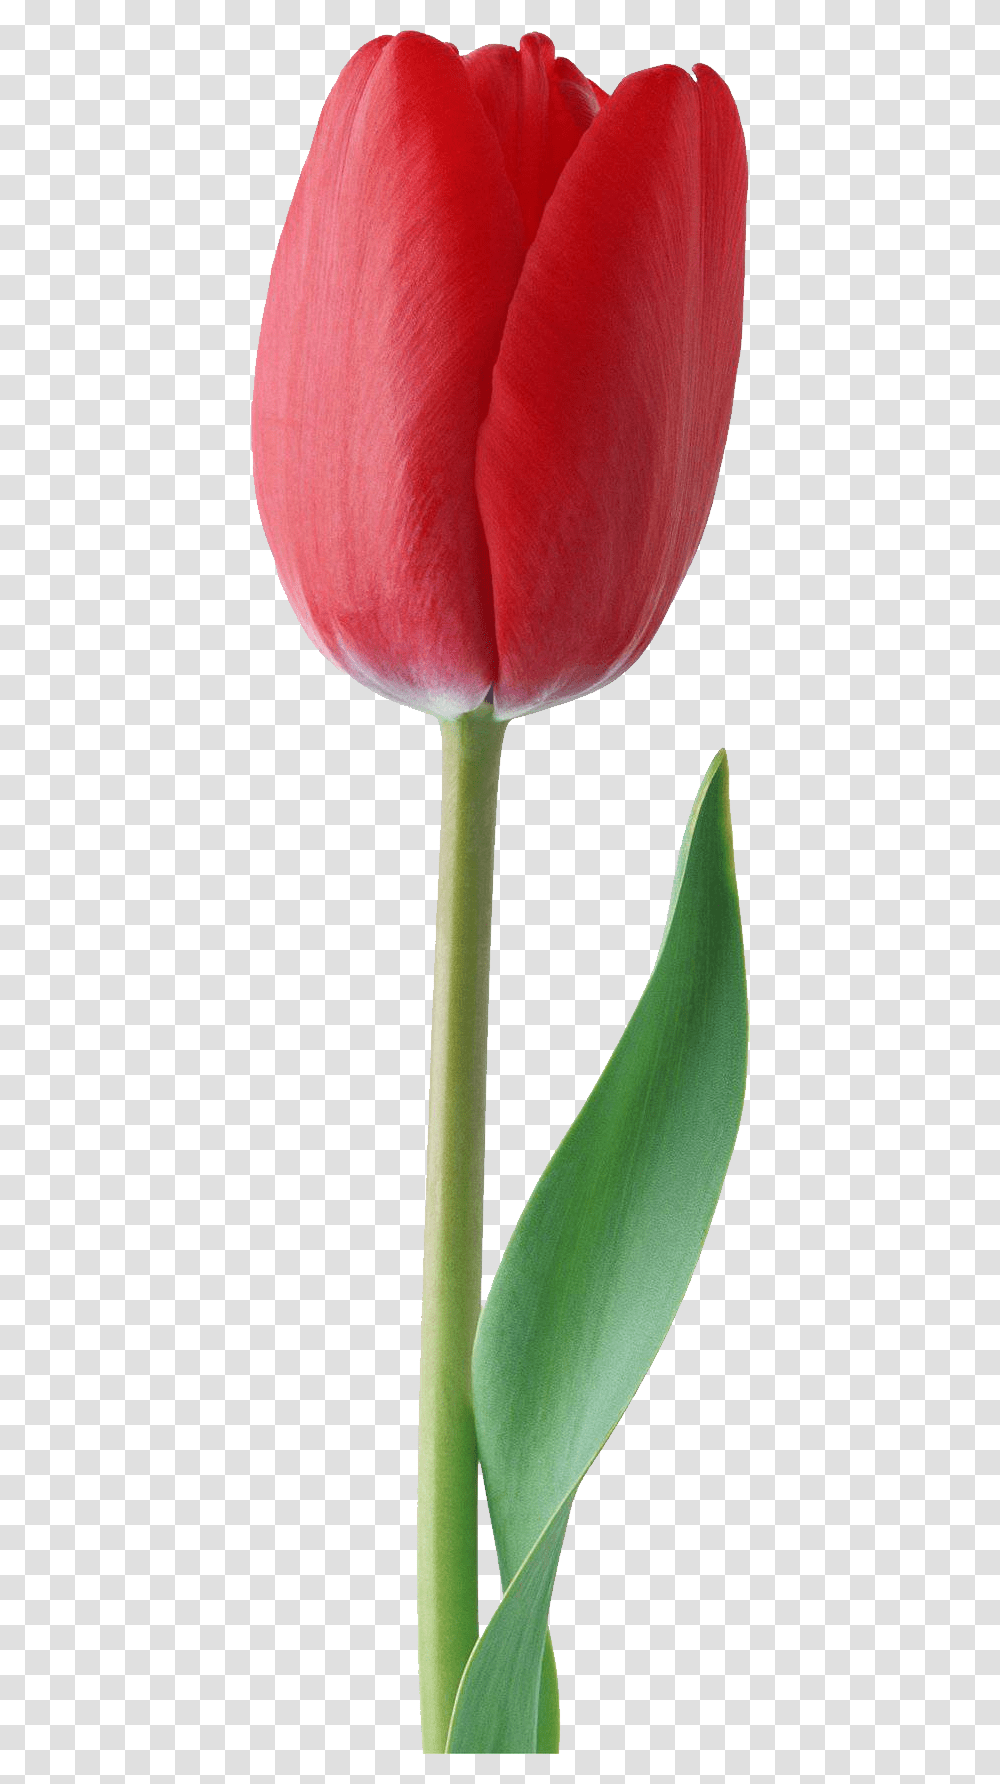 Red Tulip Image Red Tulip Flower, Plant, Blossom Transparent Png